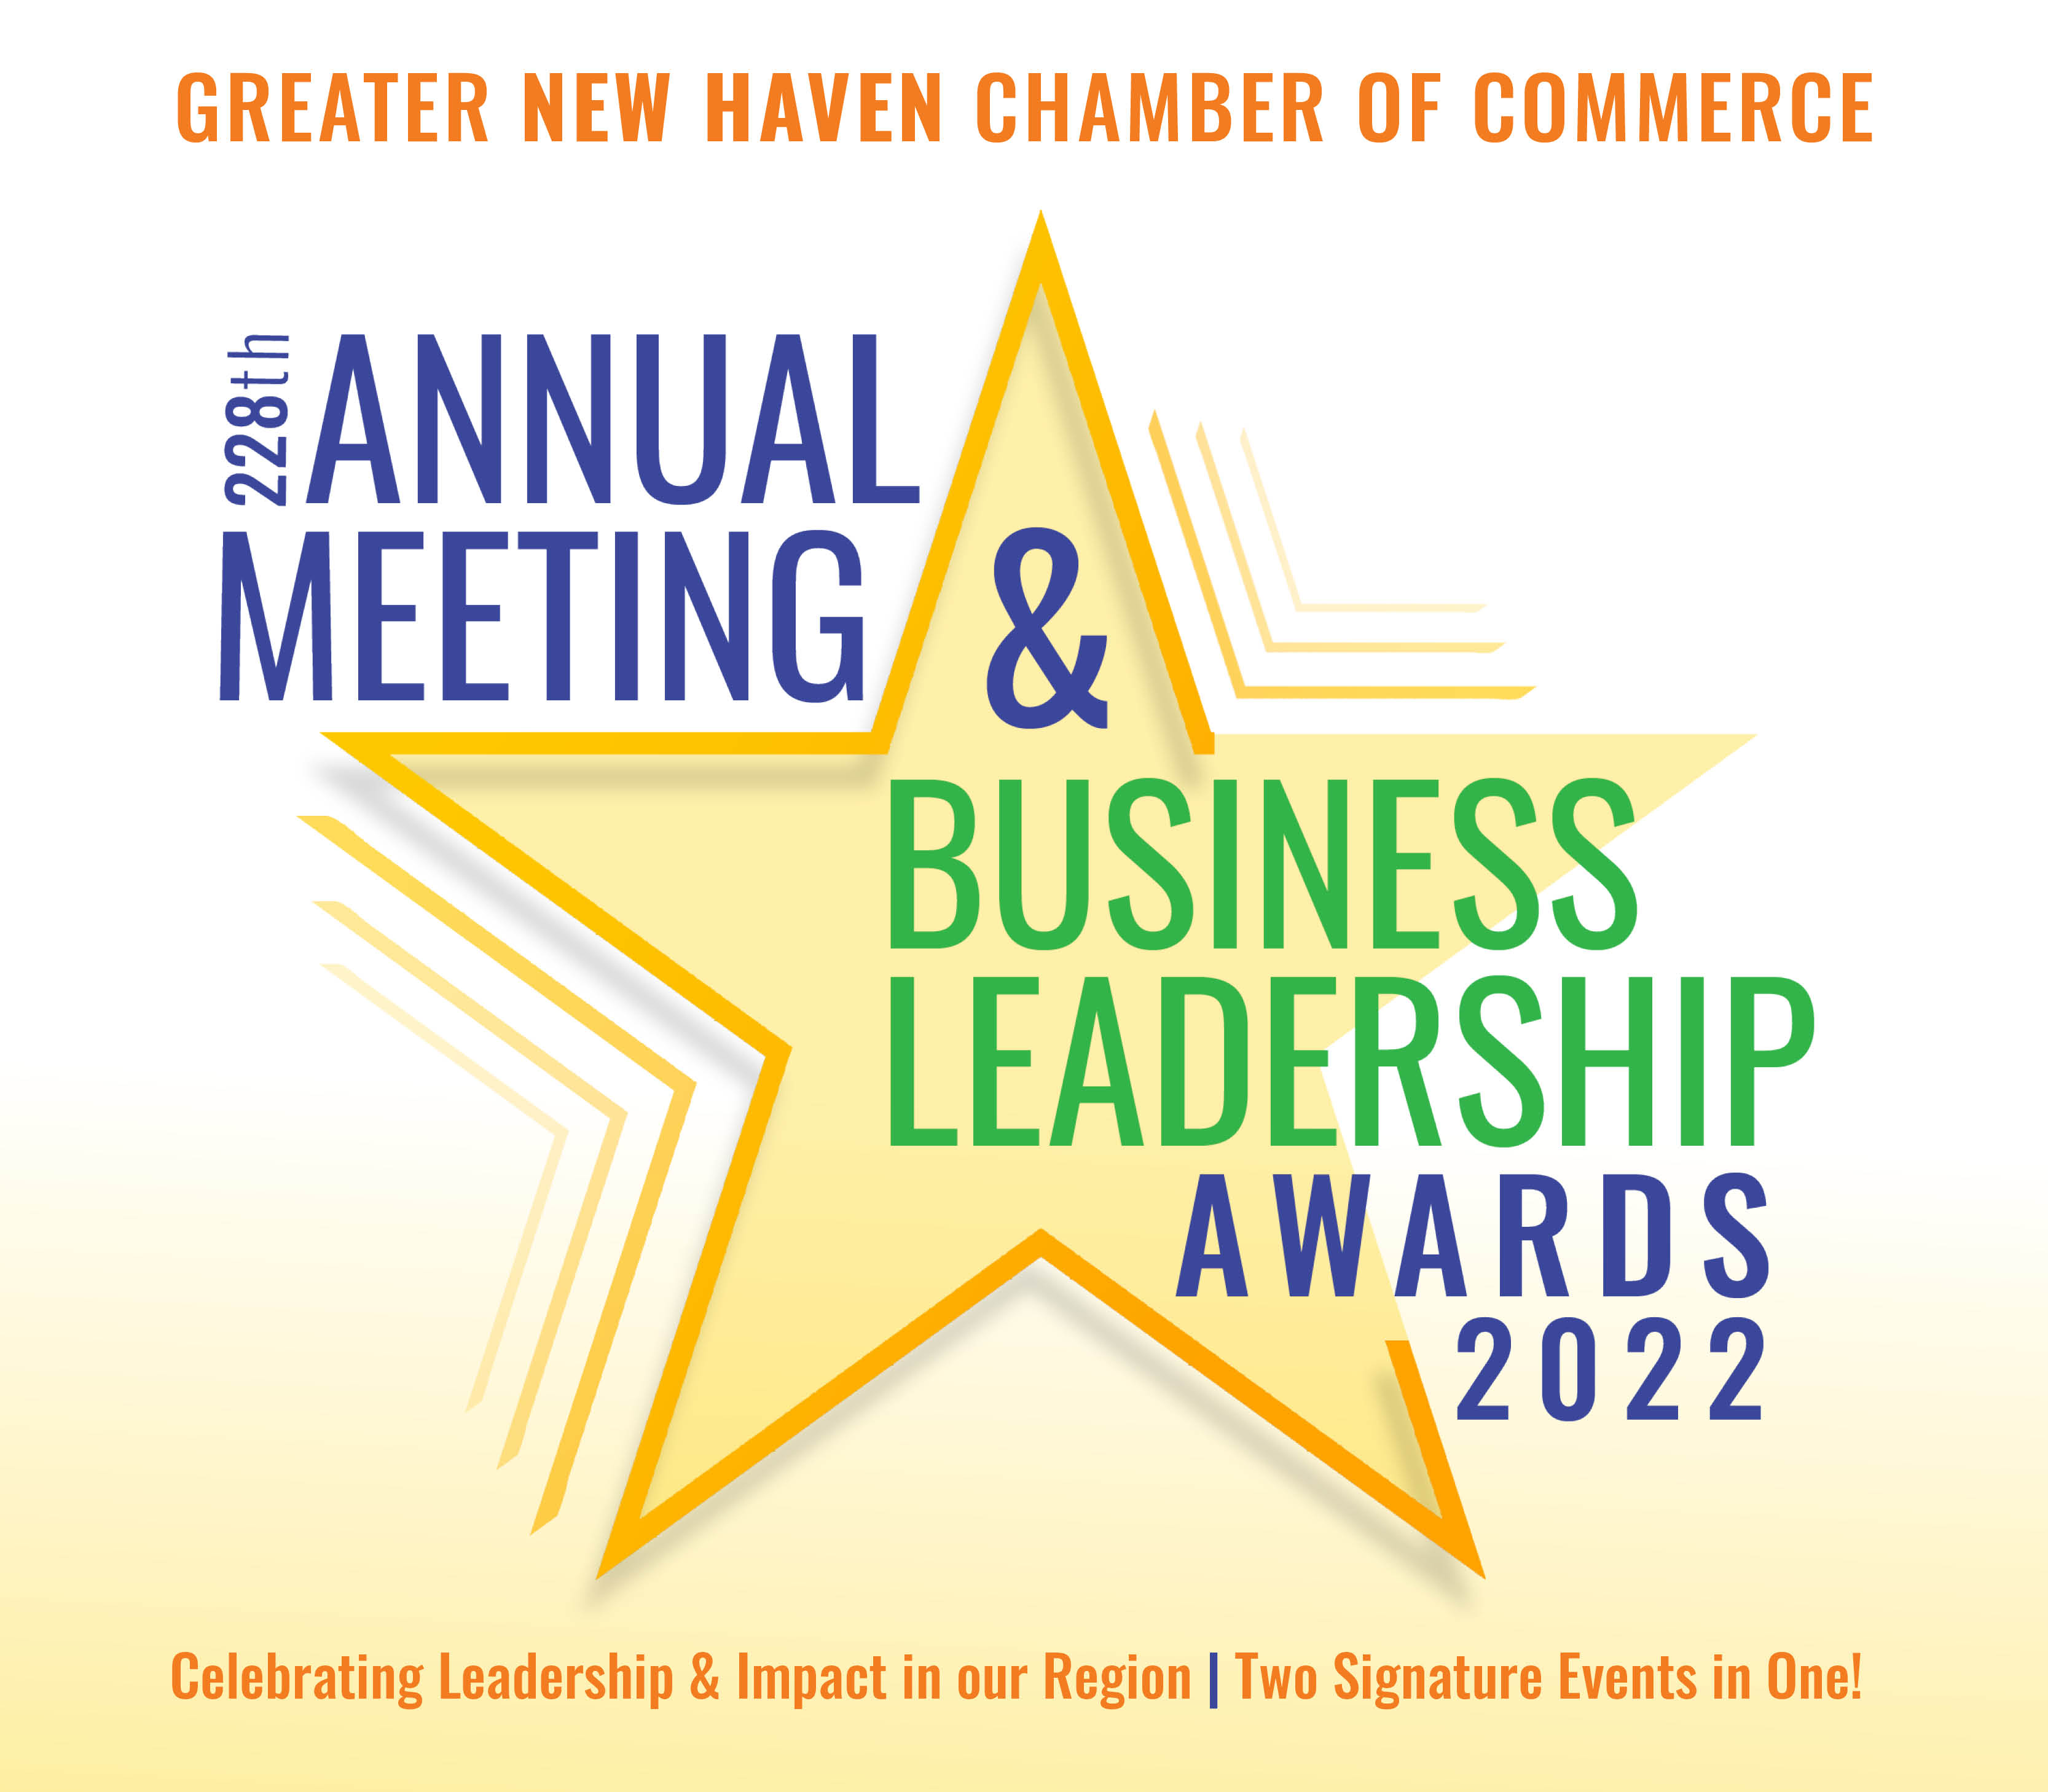 Greater New Haven Chamber to Honor The Narrative Project with the 2022 Sharon Clemons Equity & Inclusive Opportunity Award at 228th Annual Meeting & Business Leadership Awards